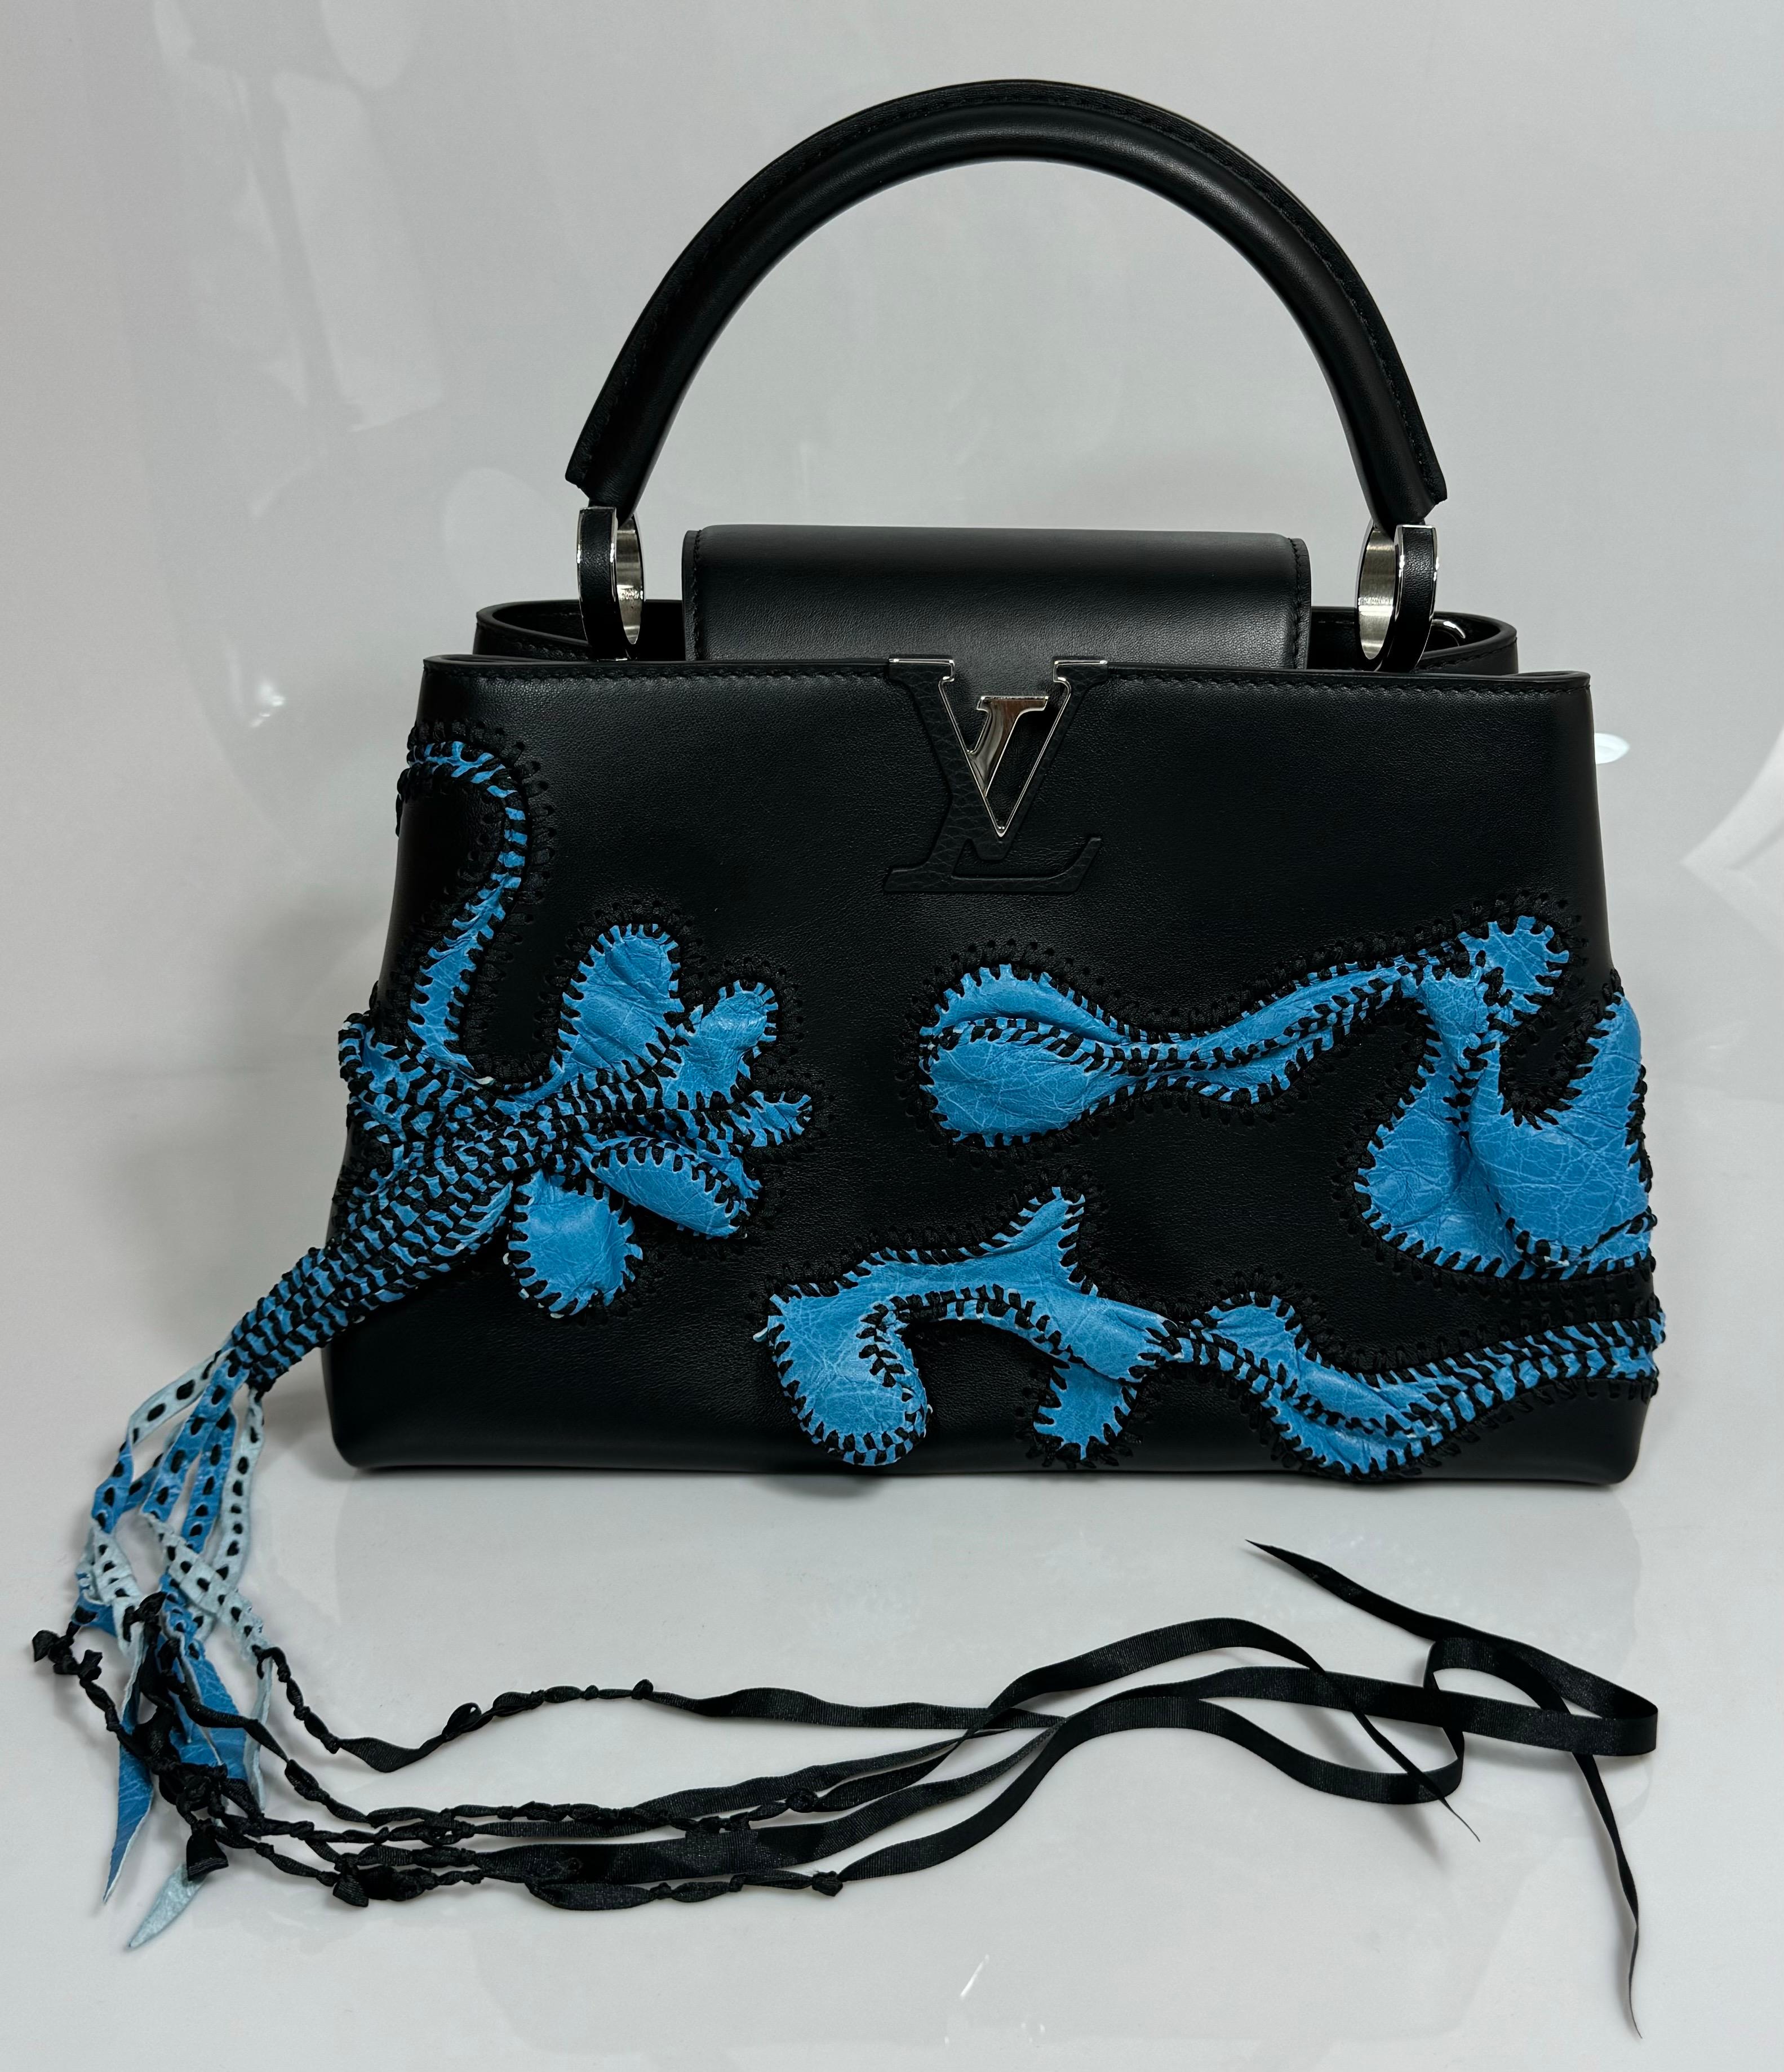 Louis Vuitton Limited Edition Nicholas Hlobo's Artycapucines Handbag-NEW IN BOX
This brand new Louis Vuitton Nicholas Hlobo Limited Edition Artycapucines handbag is made of black and blue calfskin leather with cowhide leather lining. Featuring blue